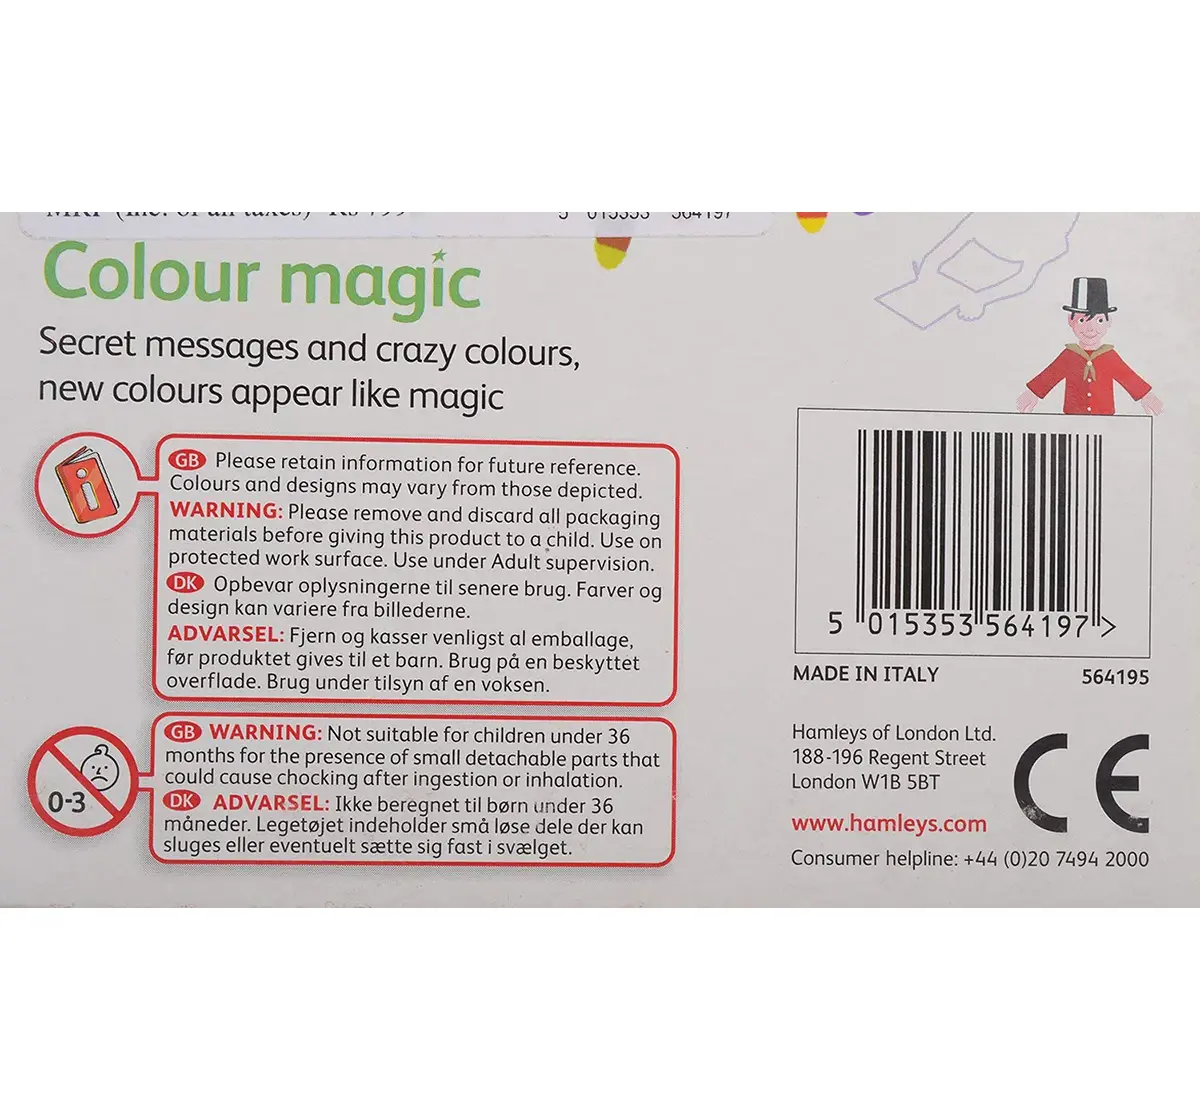  Hamleys Magic Colour Marker Pens School Stationery for Kids age 3Y+ 